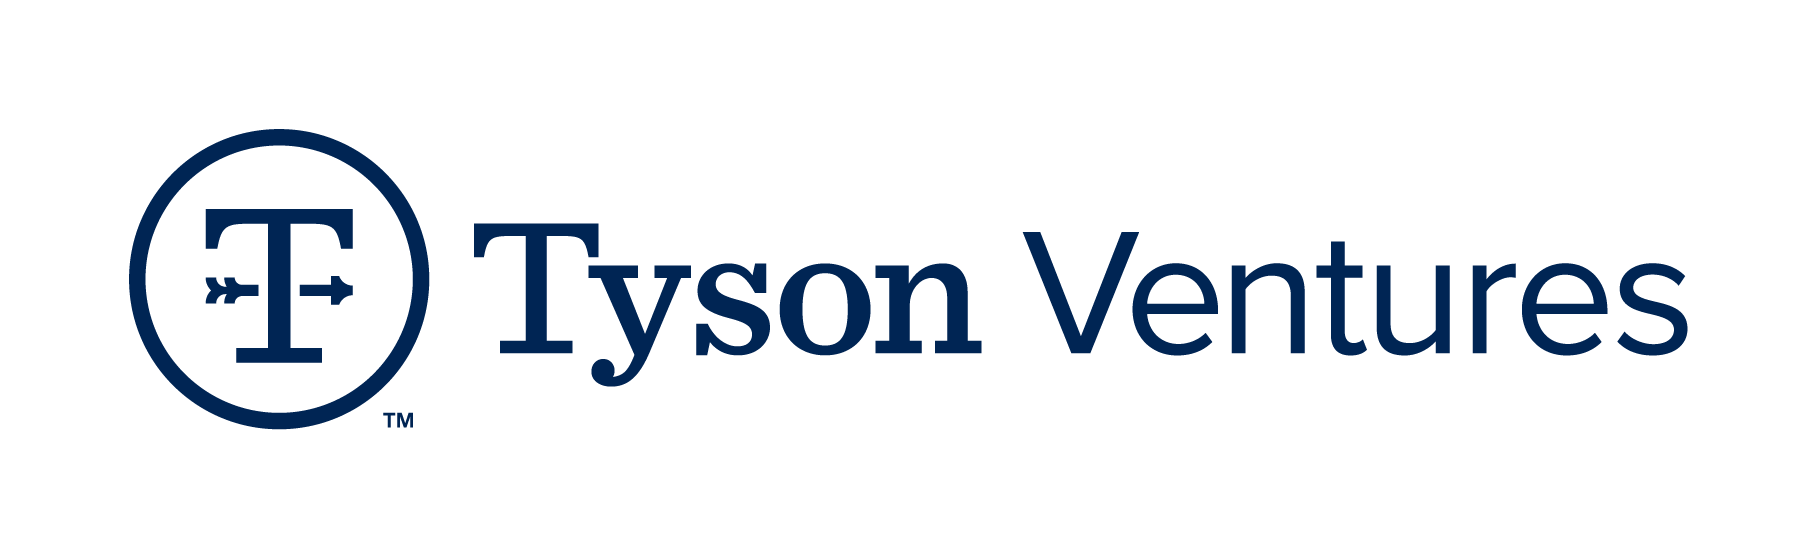 This is a photo of the Tyson Ventures logos.